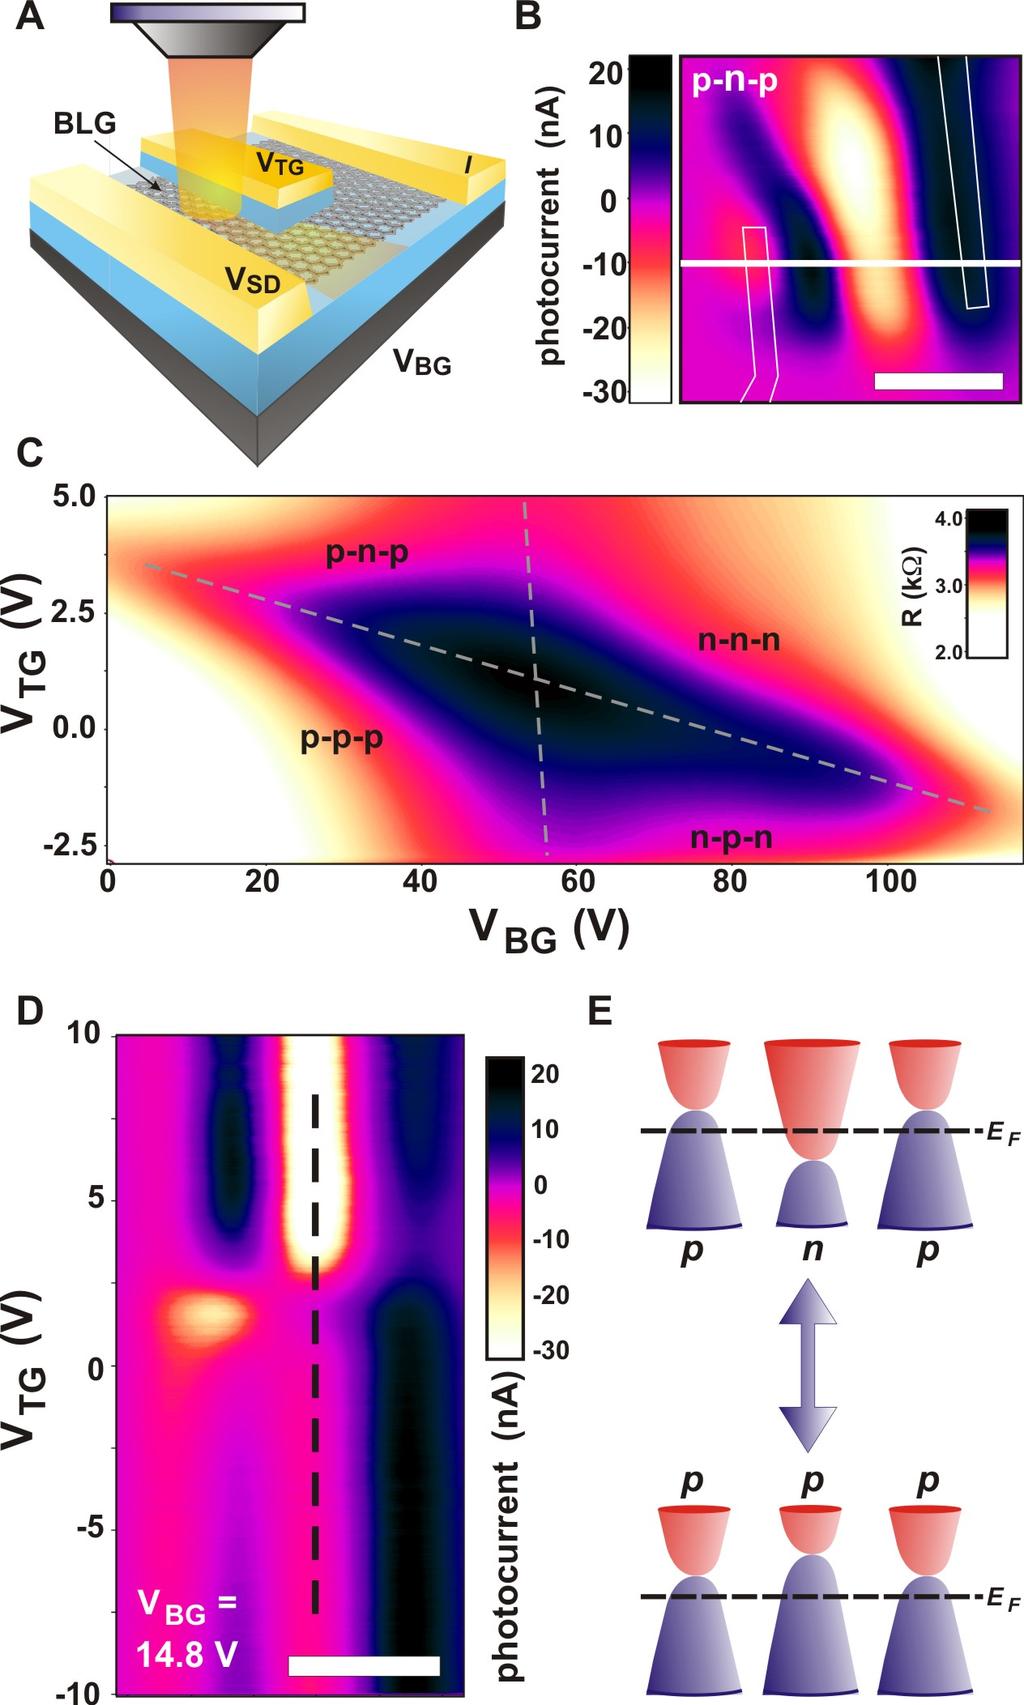 Fig. S3 Electronic transport and photocurrent characteristics of the bi-layer graphene p-np device.